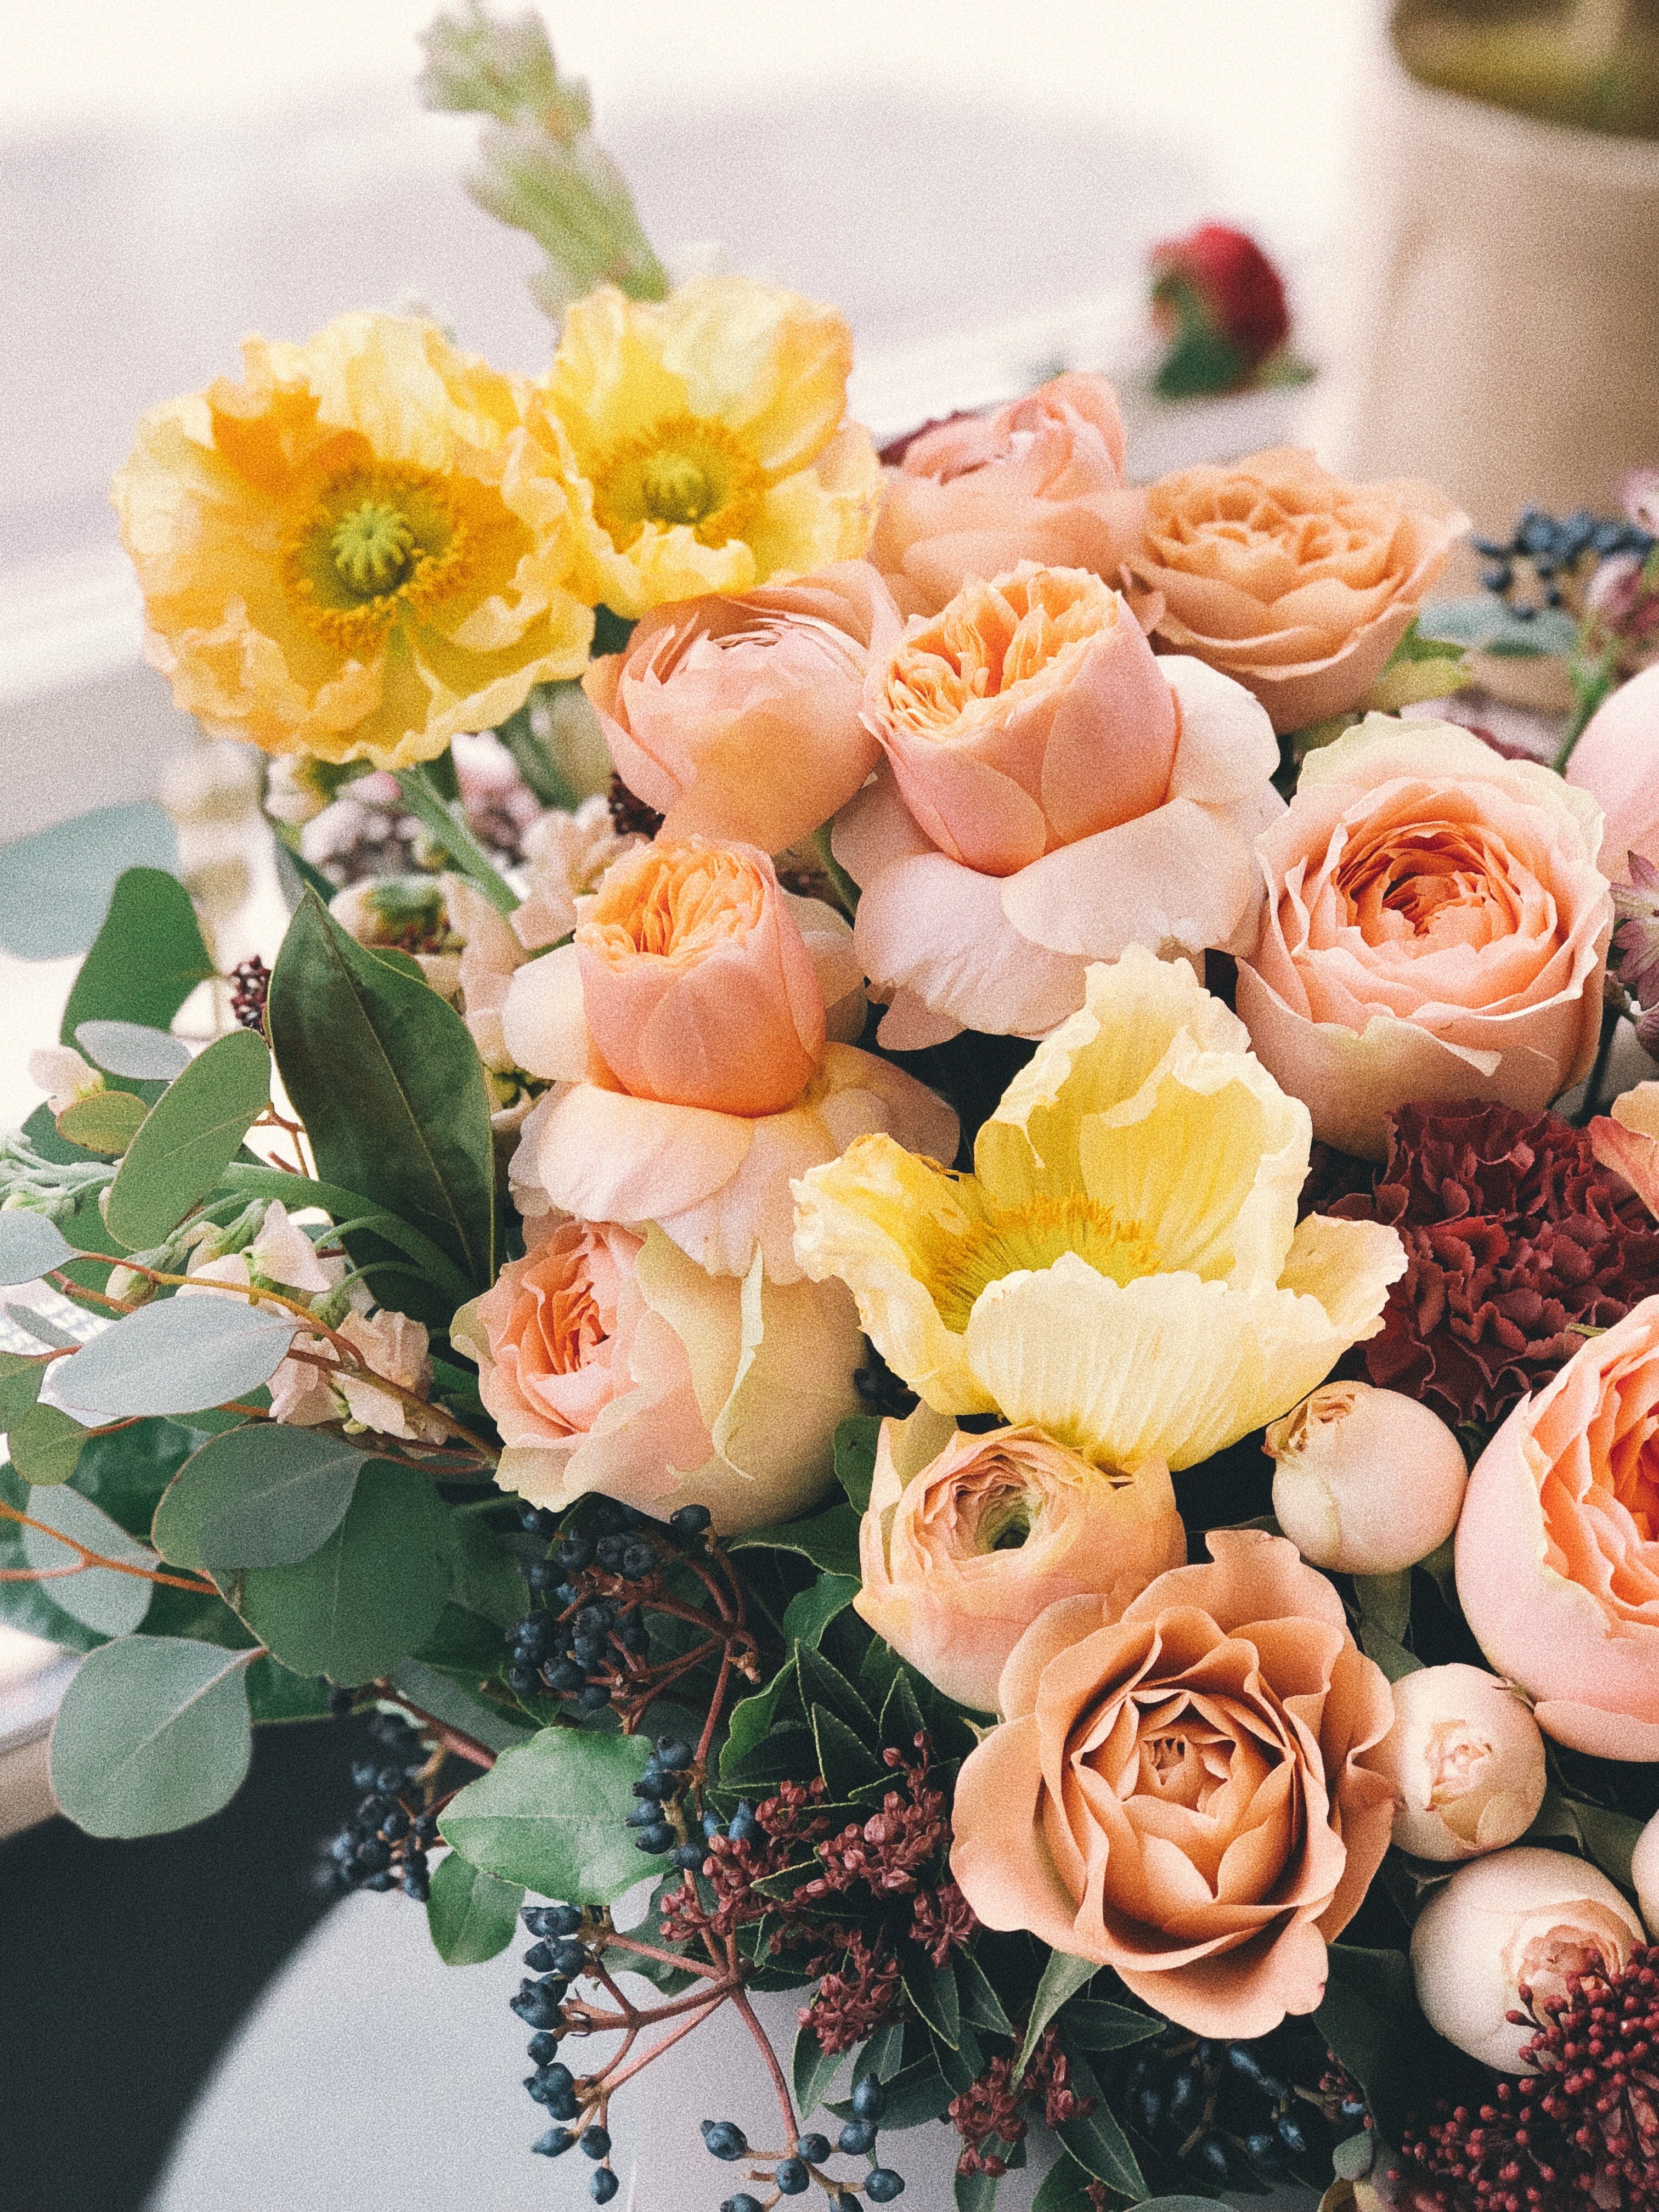 Edan purchased a large bouquet for Alice's grave. | Source: Pexels